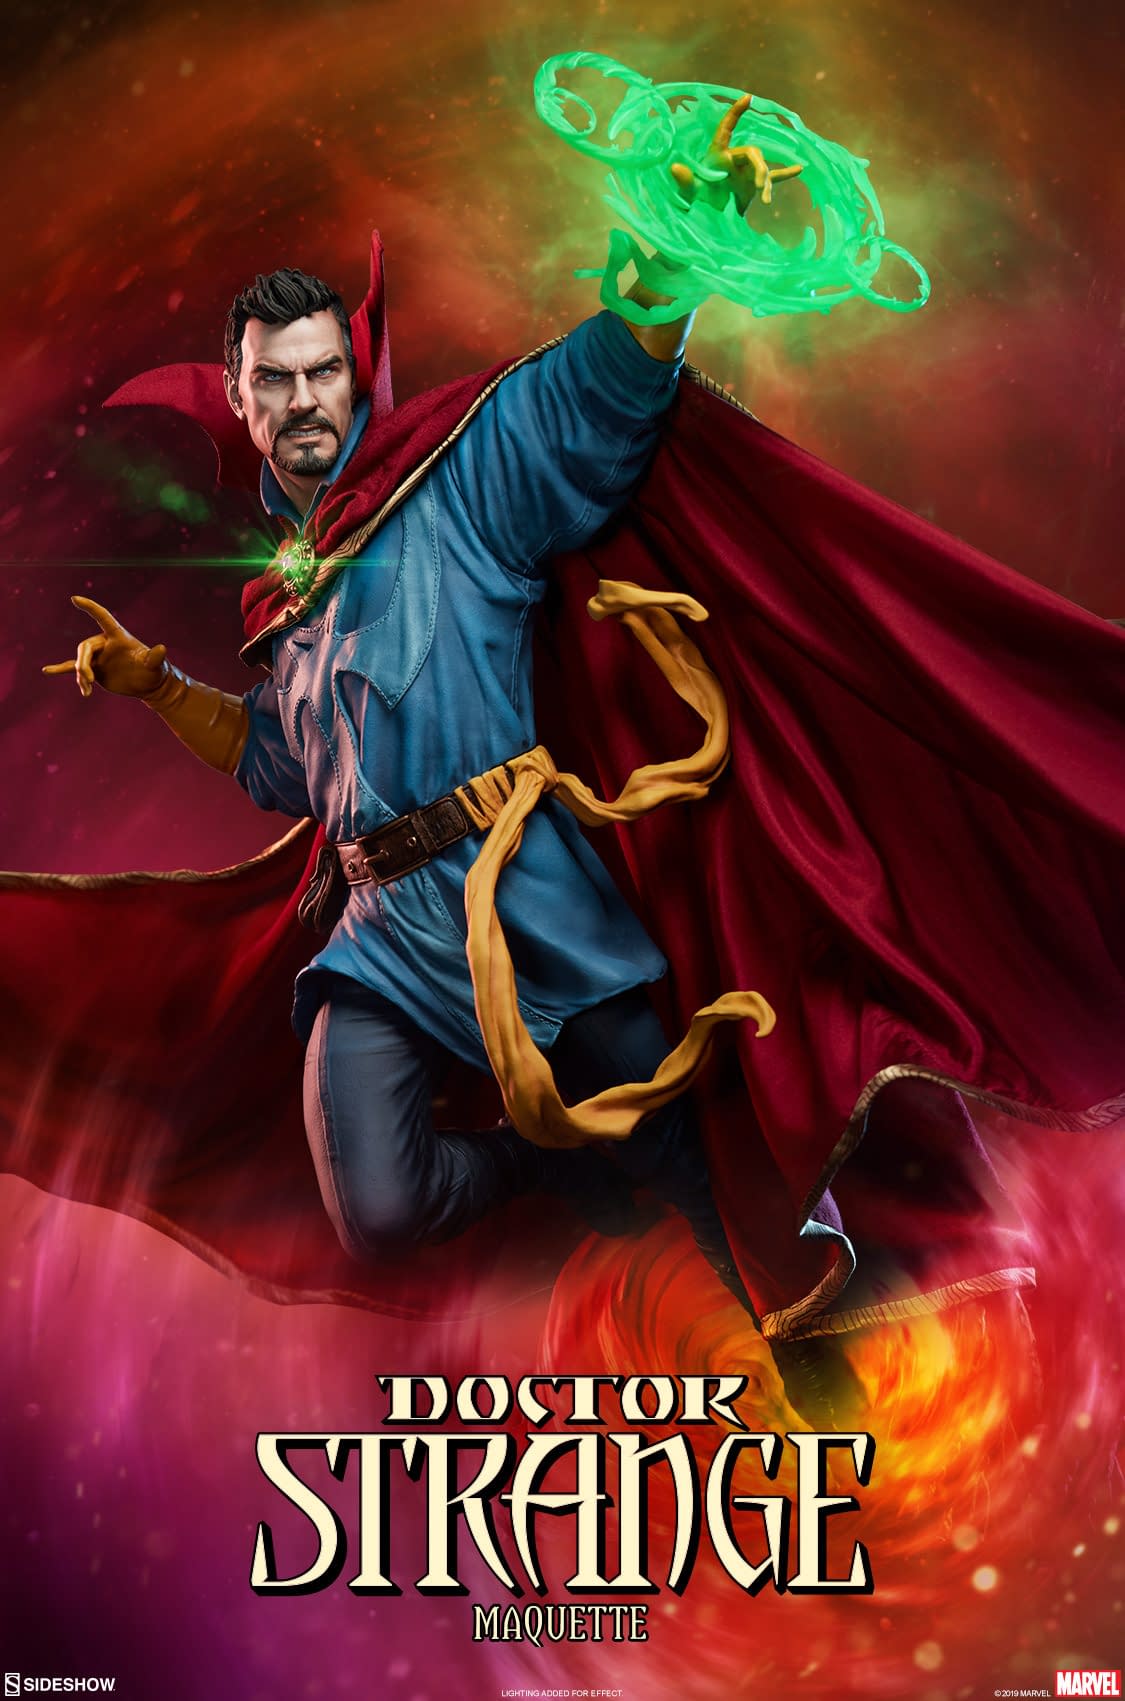 Doctor Strange Casts His Spells in New Sideshow Statue [First Look]